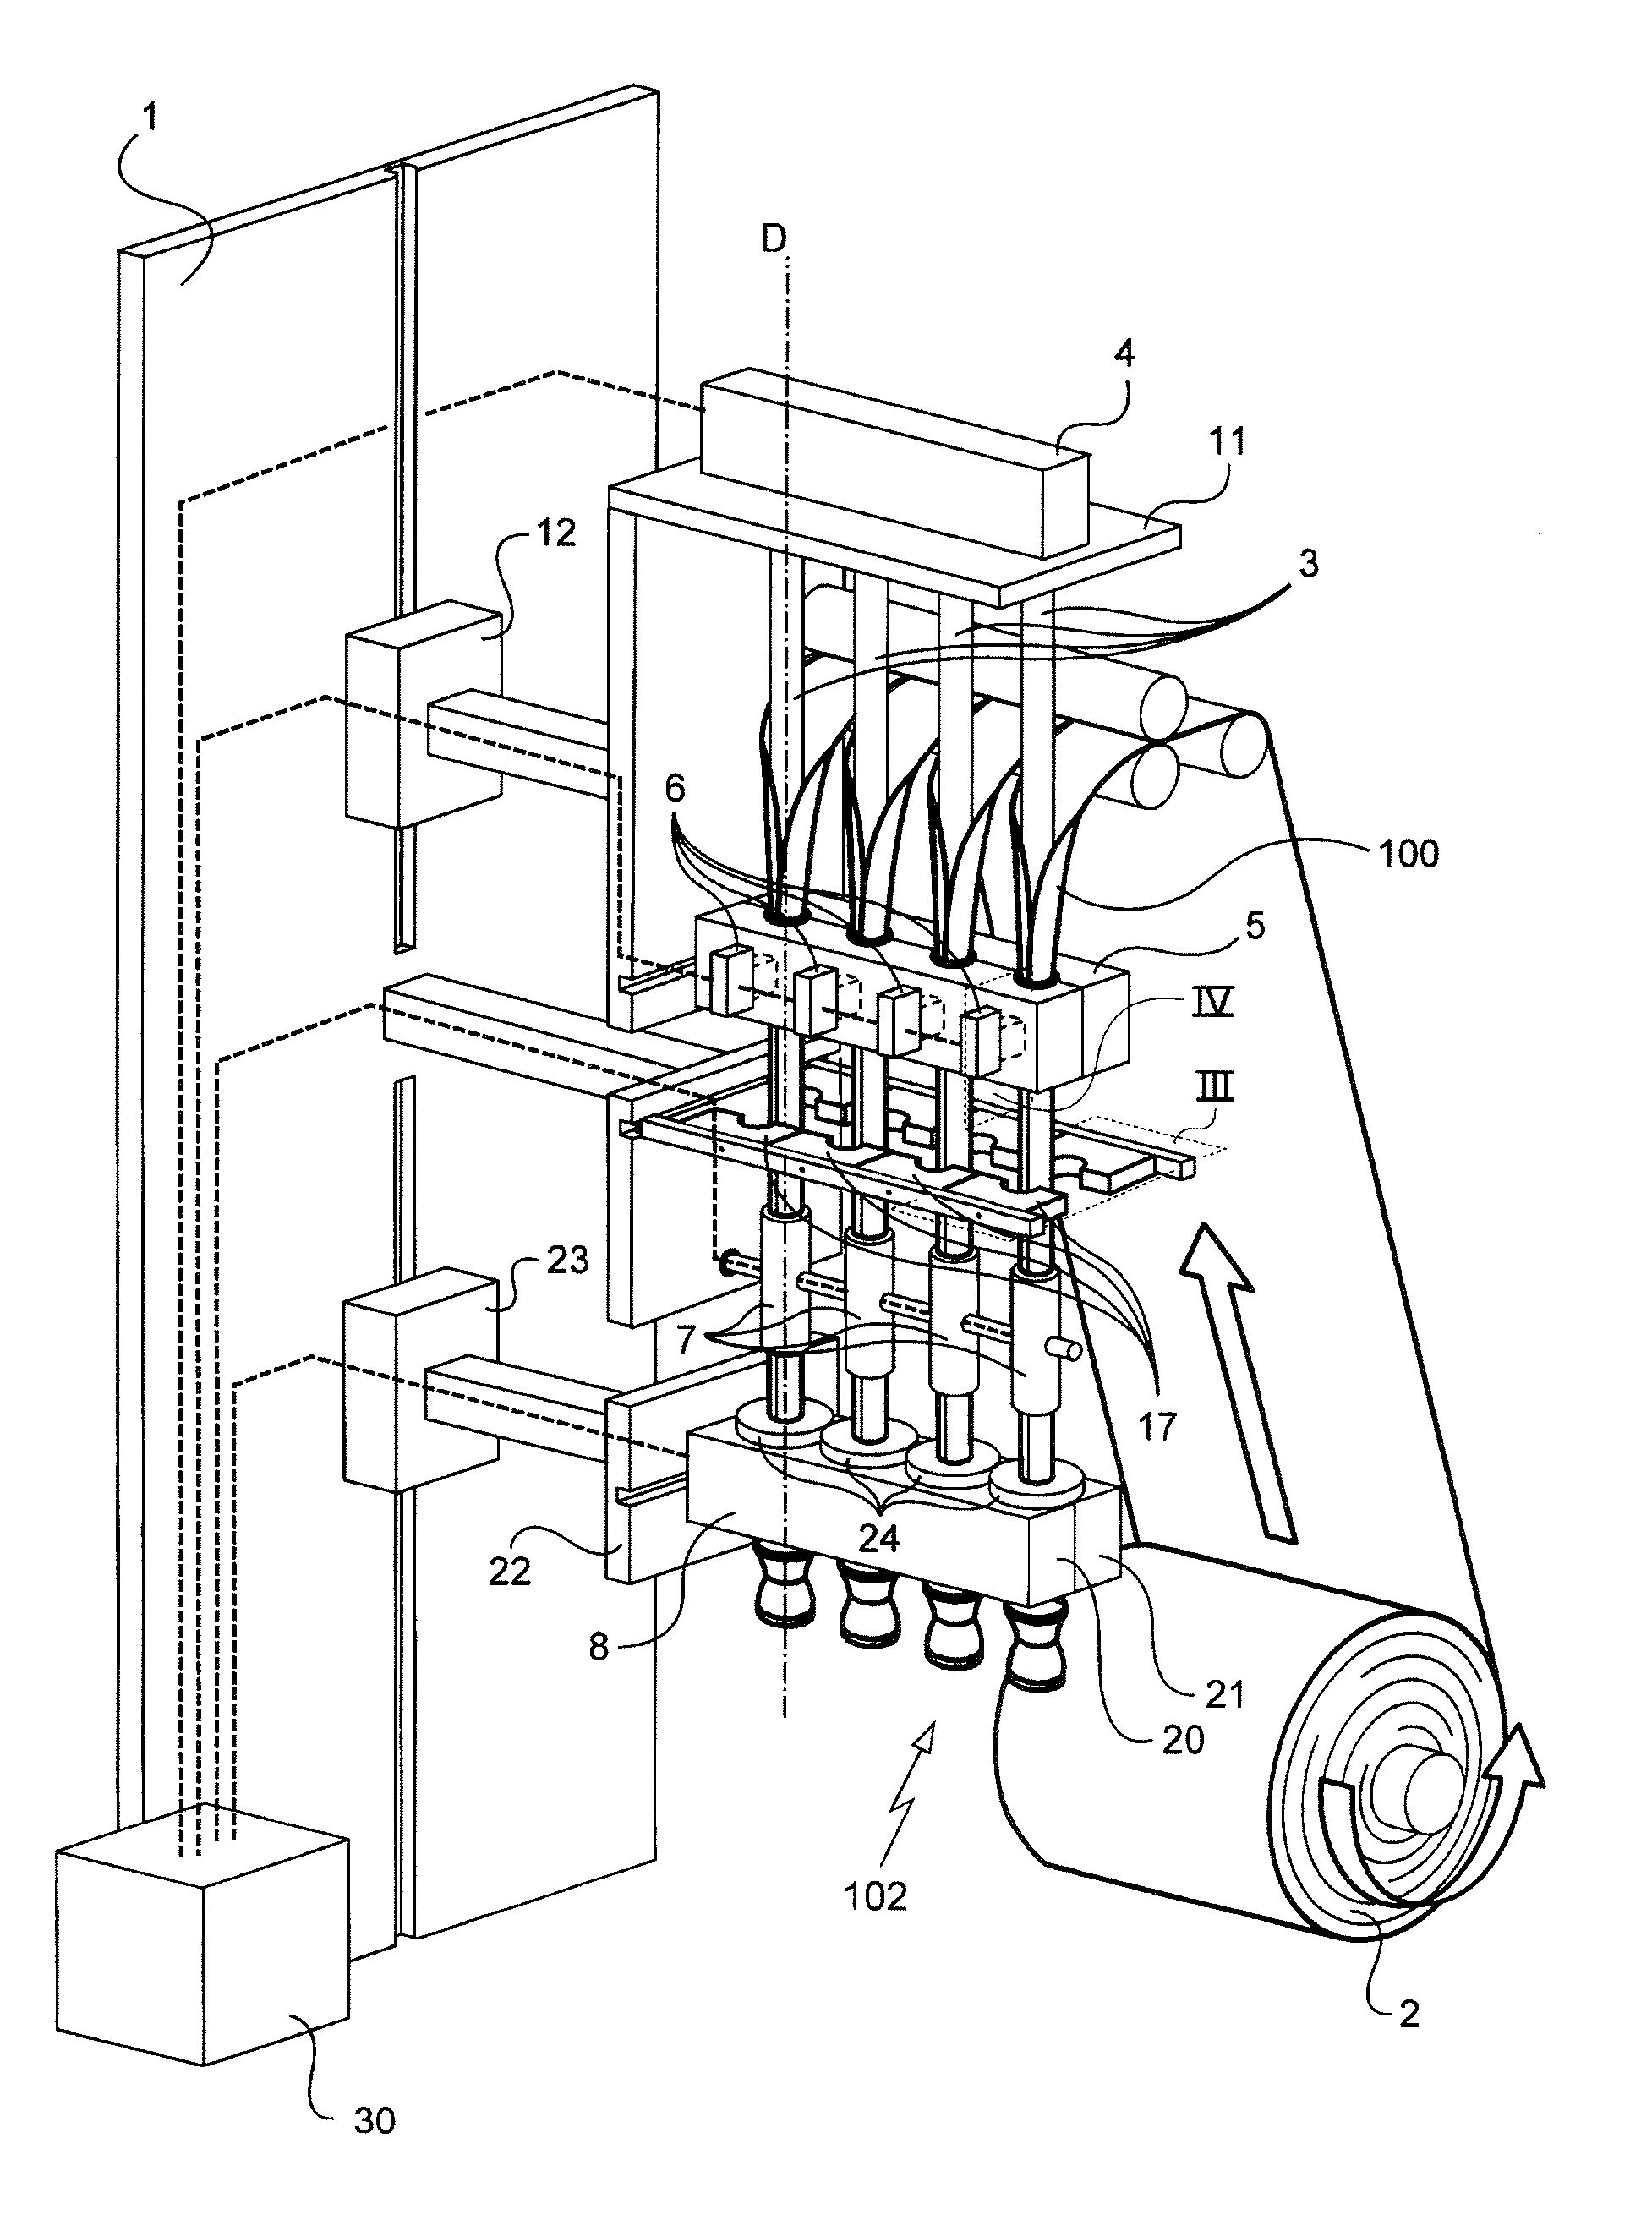 Machine for blowing molding articles such as containers